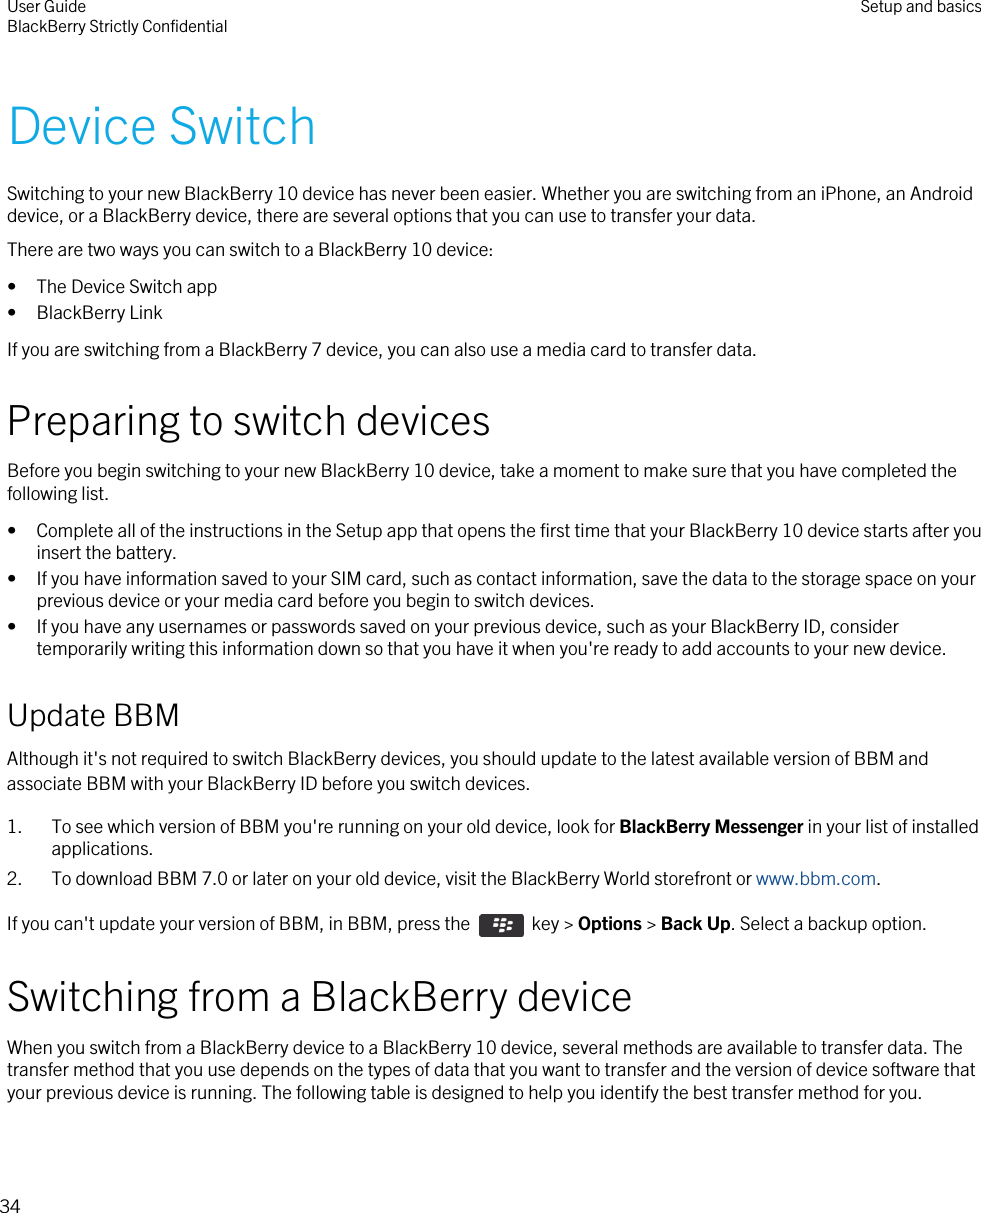 Device SwitchSwitching to your new BlackBerry 10 device has never been easier. Whether you are switching from an iPhone, an Android device, or a BlackBerry device, there are several options that you can use to transfer your data.There are two ways you can switch to a BlackBerry 10 device:• The Device Switch app• BlackBerry LinkIf you are switching from a BlackBerry 7 device, you can also use a media card to transfer data.Preparing to switch devicesBefore you begin switching to your new BlackBerry 10 device, take a moment to make sure that you have completed the following list.• Complete all of the instructions in the Setup app that opens the first time that your BlackBerry 10 device starts after you insert the battery.• If you have information saved to your SIM card, such as contact information, save the data to the storage space on your previous device or your media card before you begin to switch devices.• If you have any usernames or passwords saved on your previous device, such as your BlackBerry ID, consider temporarily writing this information down so that you have it when you&apos;re ready to add accounts to your new device.Update BBMAlthough it&apos;s not required to switch BlackBerry devices, you should update to the latest available version of BBM and associate BBM with your BlackBerry ID before you switch devices.1. To see which version of BBM you&apos;re running on your old device, look for BlackBerry Messenger in your list of installed applications.2. To download BBM 7.0 or later on your old device, visit the BlackBerry World storefront or www.bbm.com.If you can&apos;t update your version of BBM, in BBM, press the   key &gt; Options &gt; Back Up. Select a backup option.Switching from a BlackBerry deviceWhen you switch from a BlackBerry device to a BlackBerry 10 device, several methods are available to transfer data. The transfer method that you use depends on the types of data that you want to transfer and the version of device software that your previous device is running. The following table is designed to help you identify the best transfer method for you.User GuideBlackBerry Strictly Confidential Setup and basics34